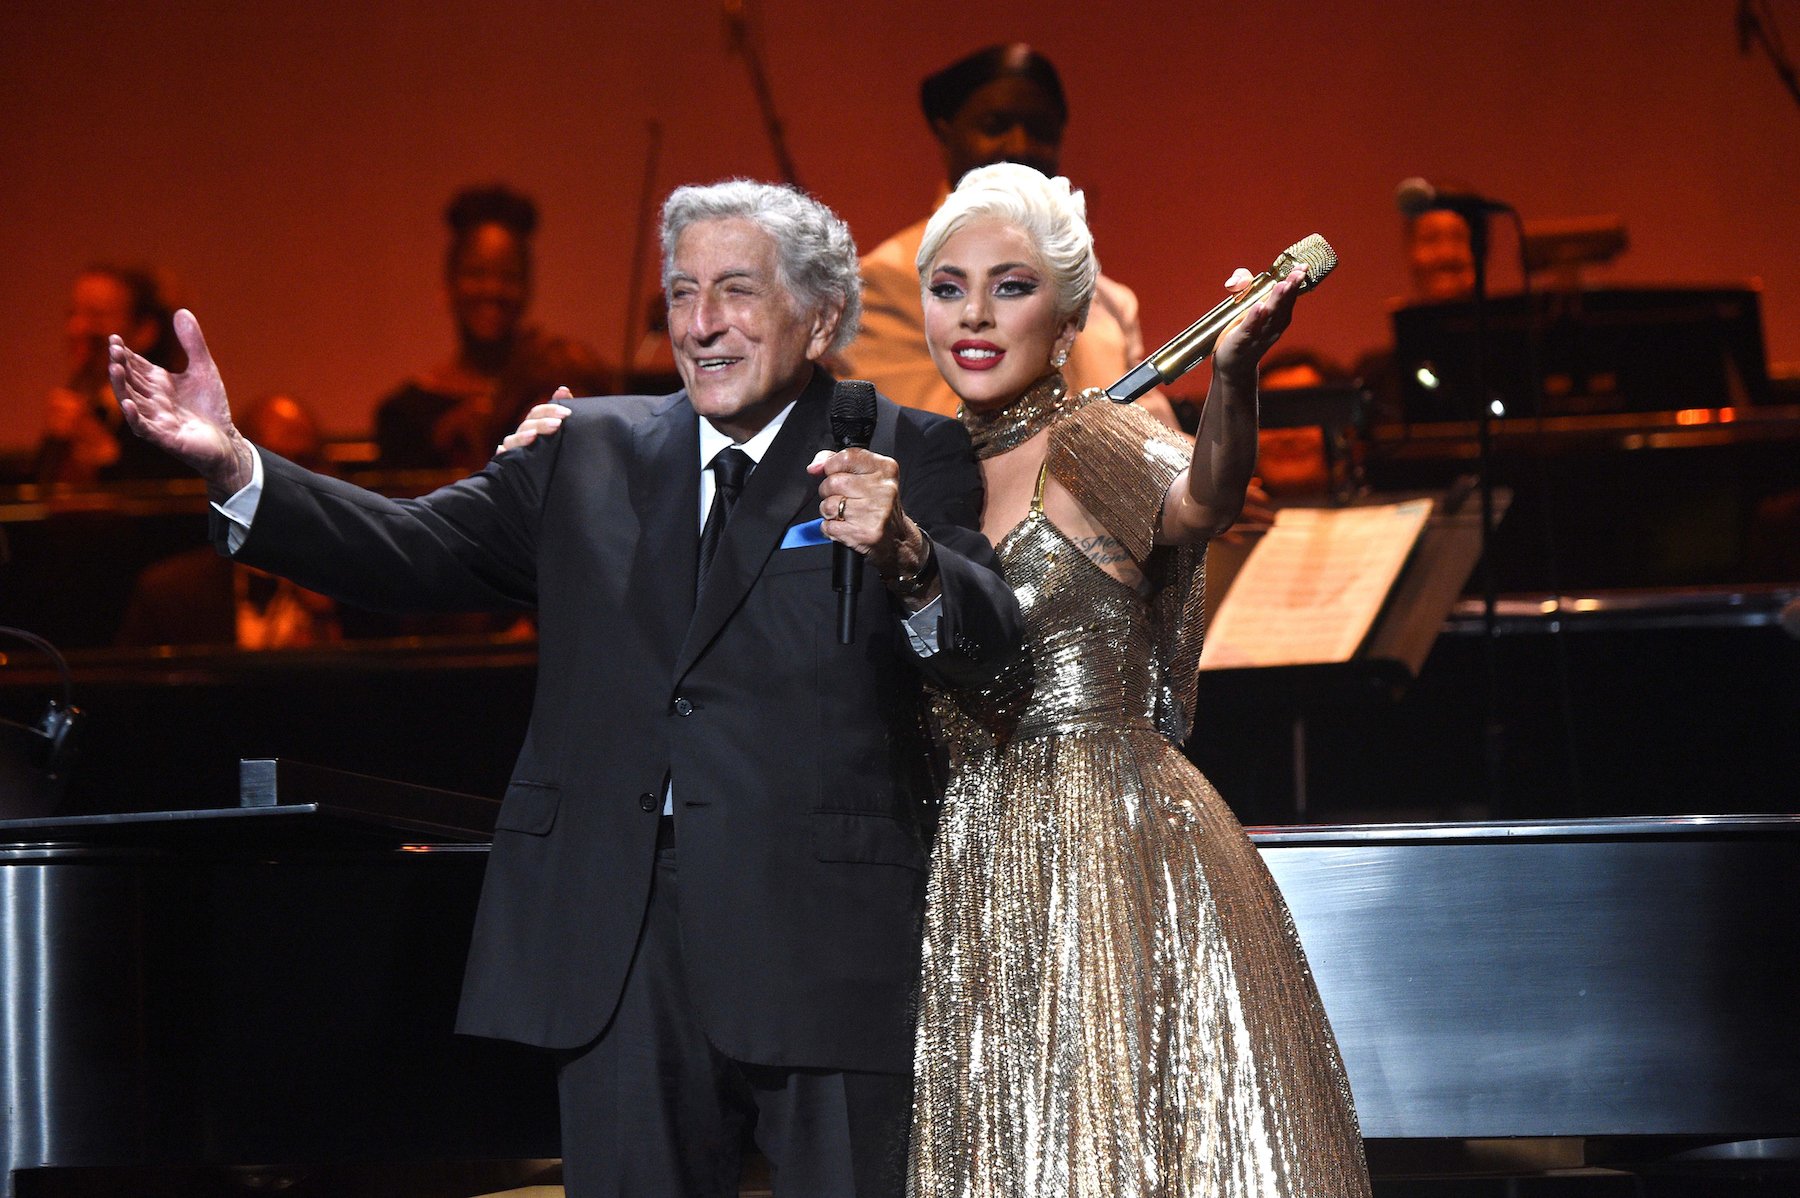 Tony Bennett and Lady Gaga perform live at Radio City Music Hall for 'One Last Time: An Evening With Tony Bennett and Lady Gaga'